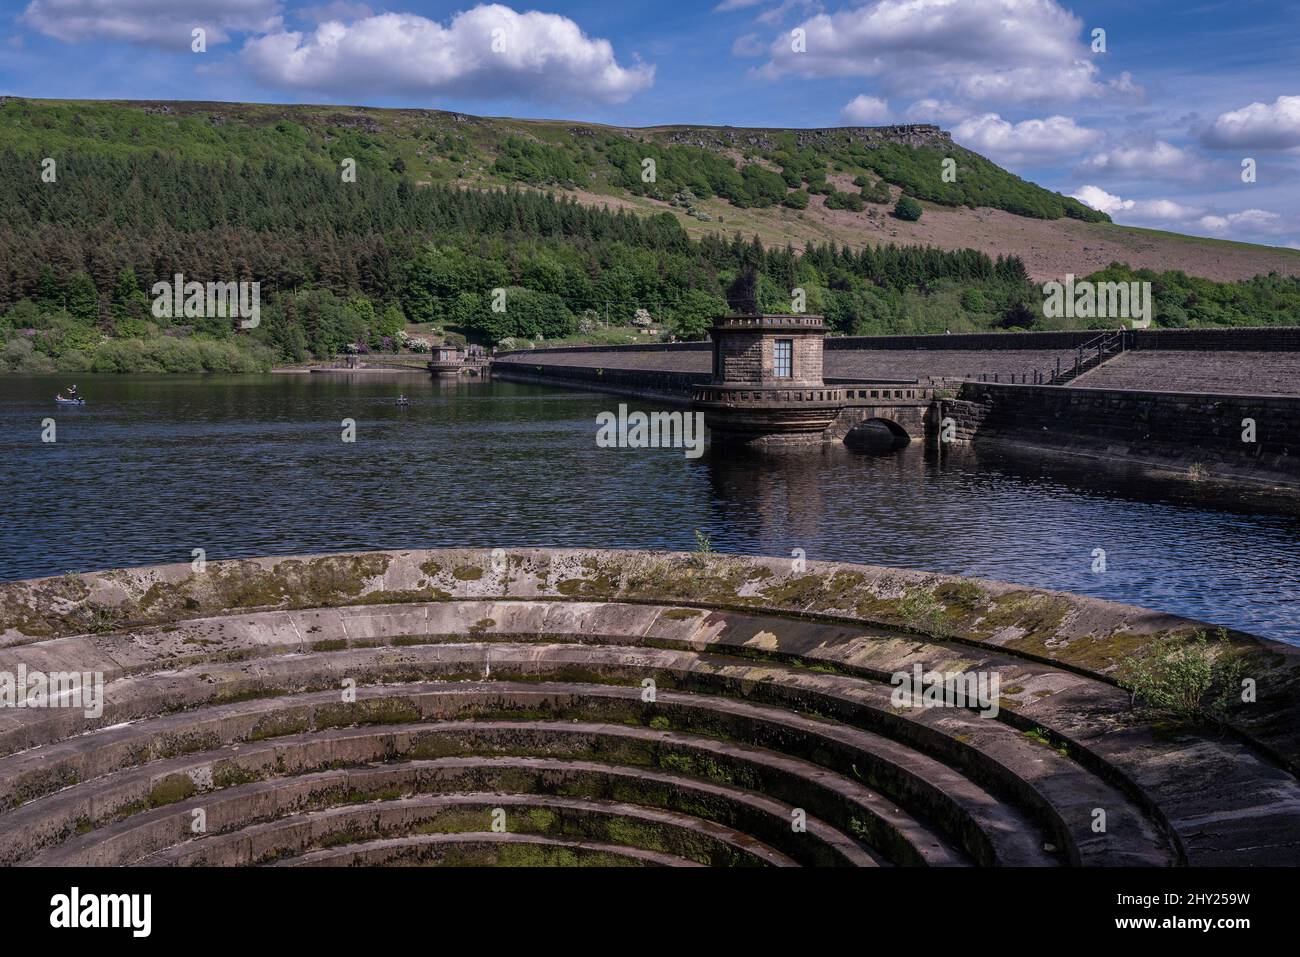 Scenery of the famous Ladybower Reservoir in Derbyshire, England Stock Photo